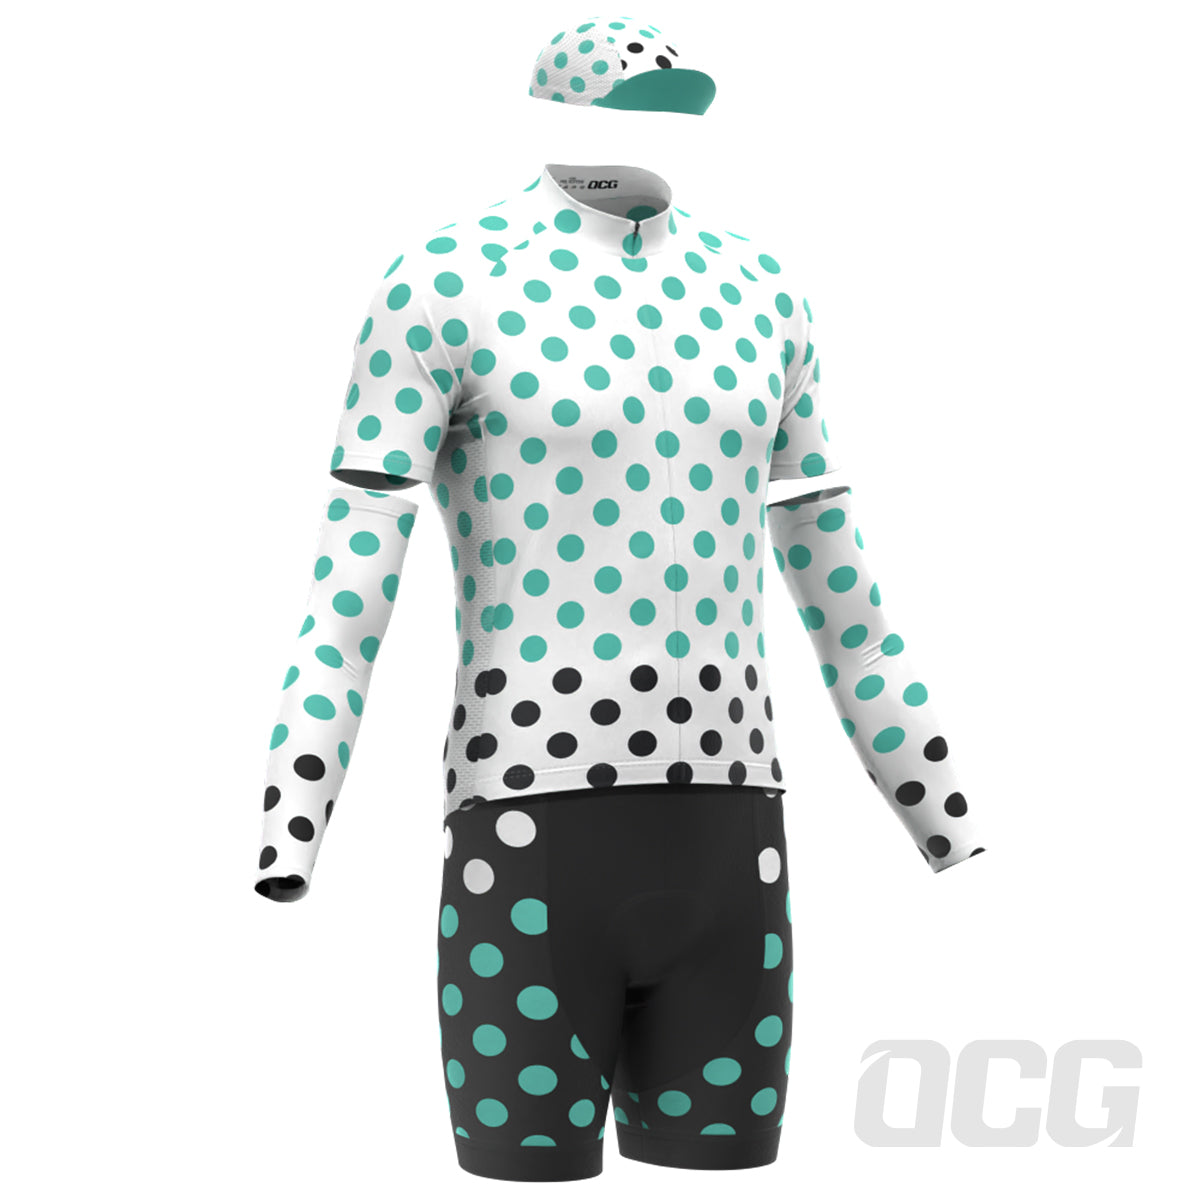 Men's Red Polka Dots on White 4 Piece Cycling Kit